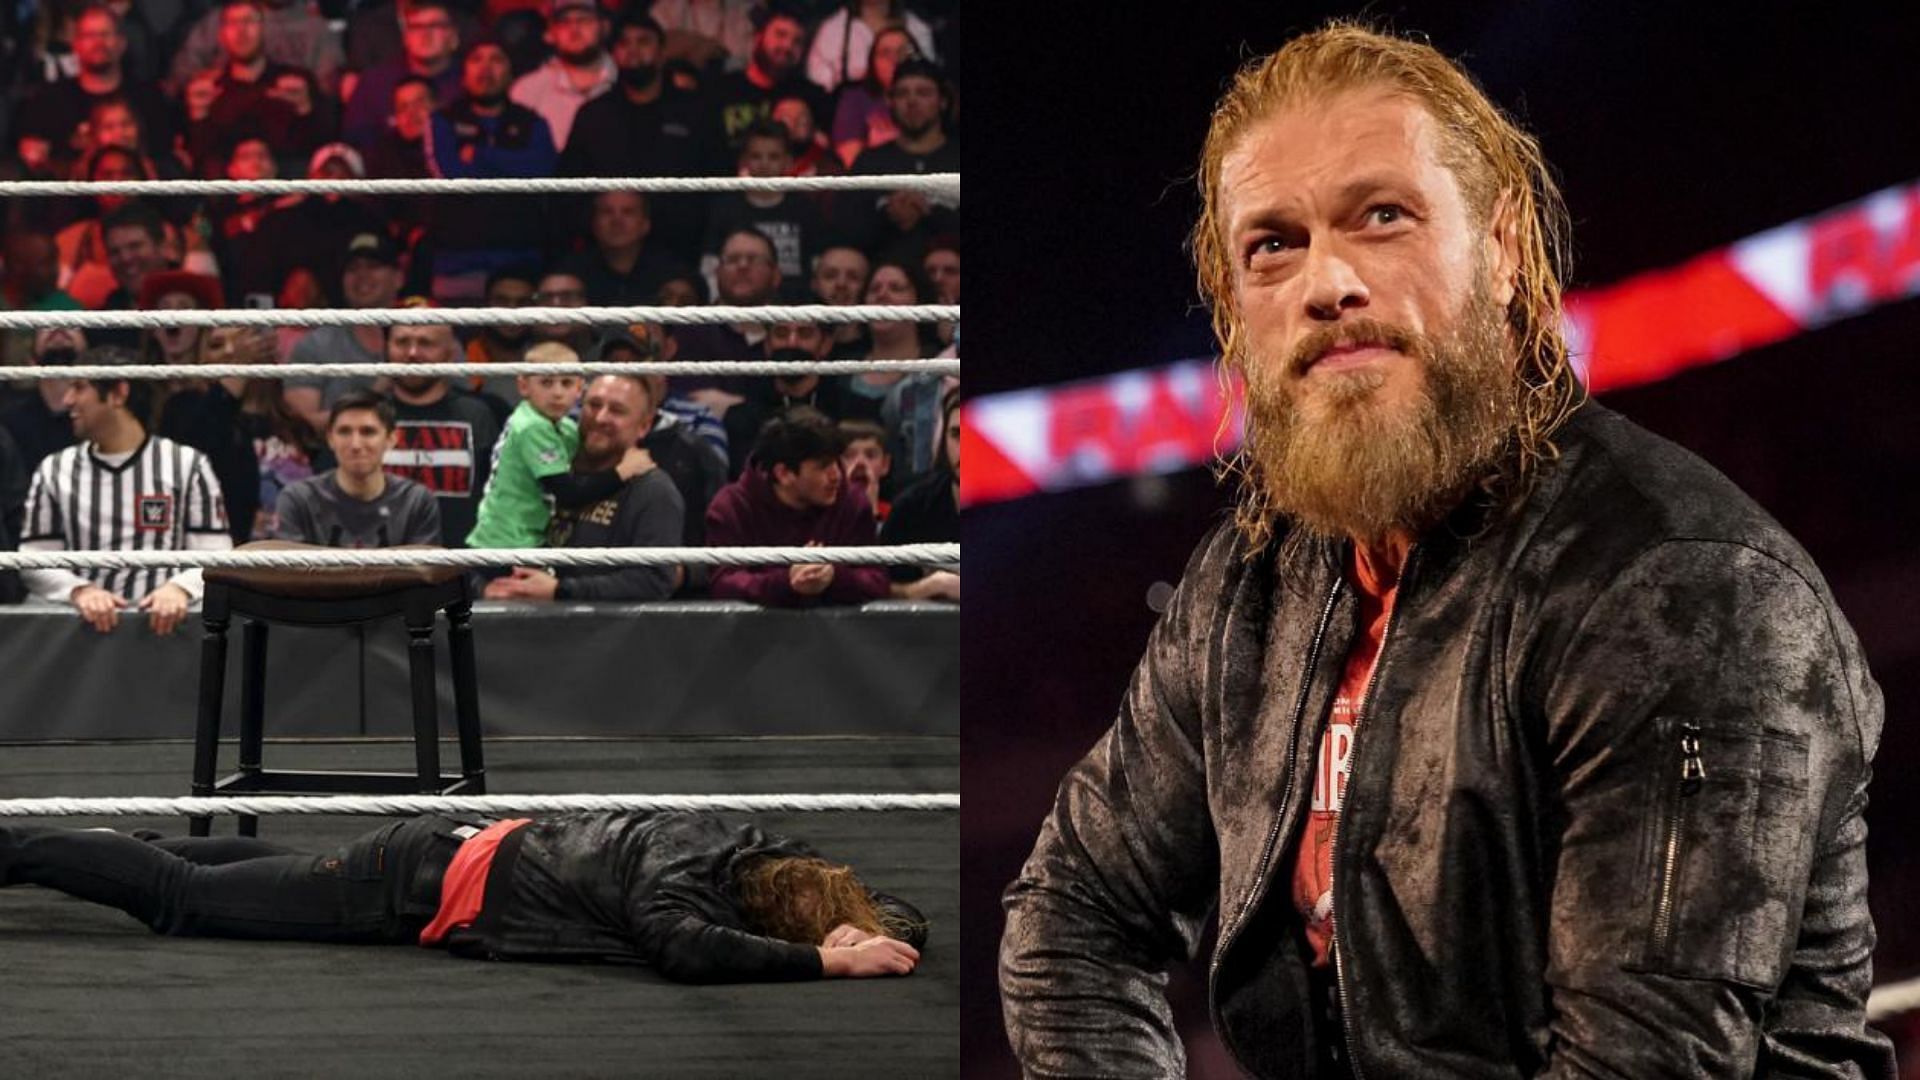 Edge got laid out by The Miz on Monday Night RAW.